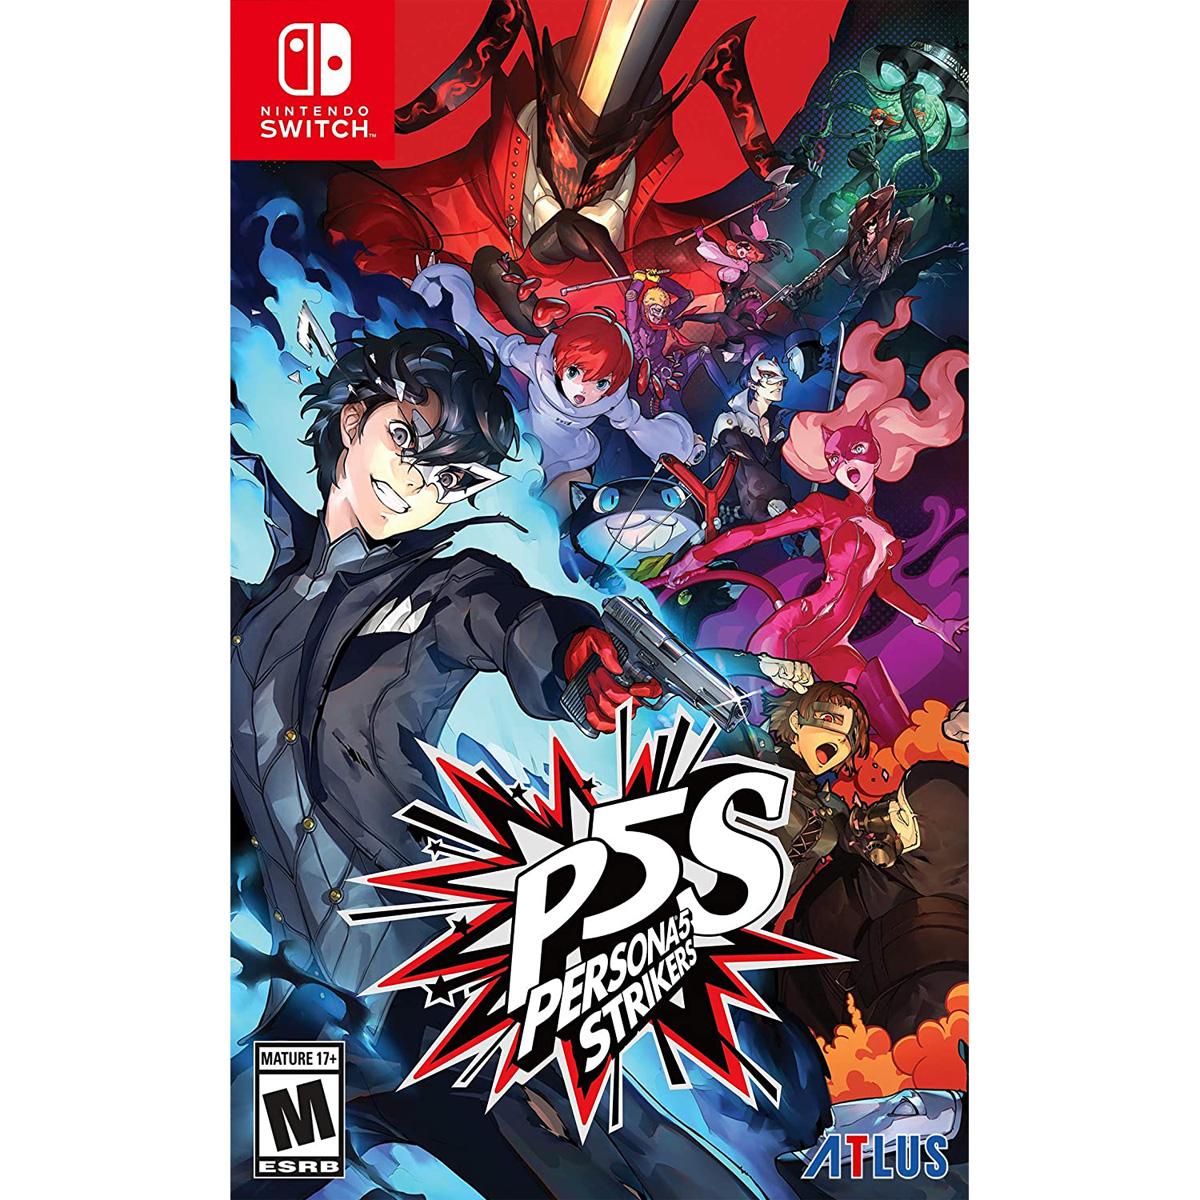 Persona 5 Strikers Nintendo Switch for $24.99